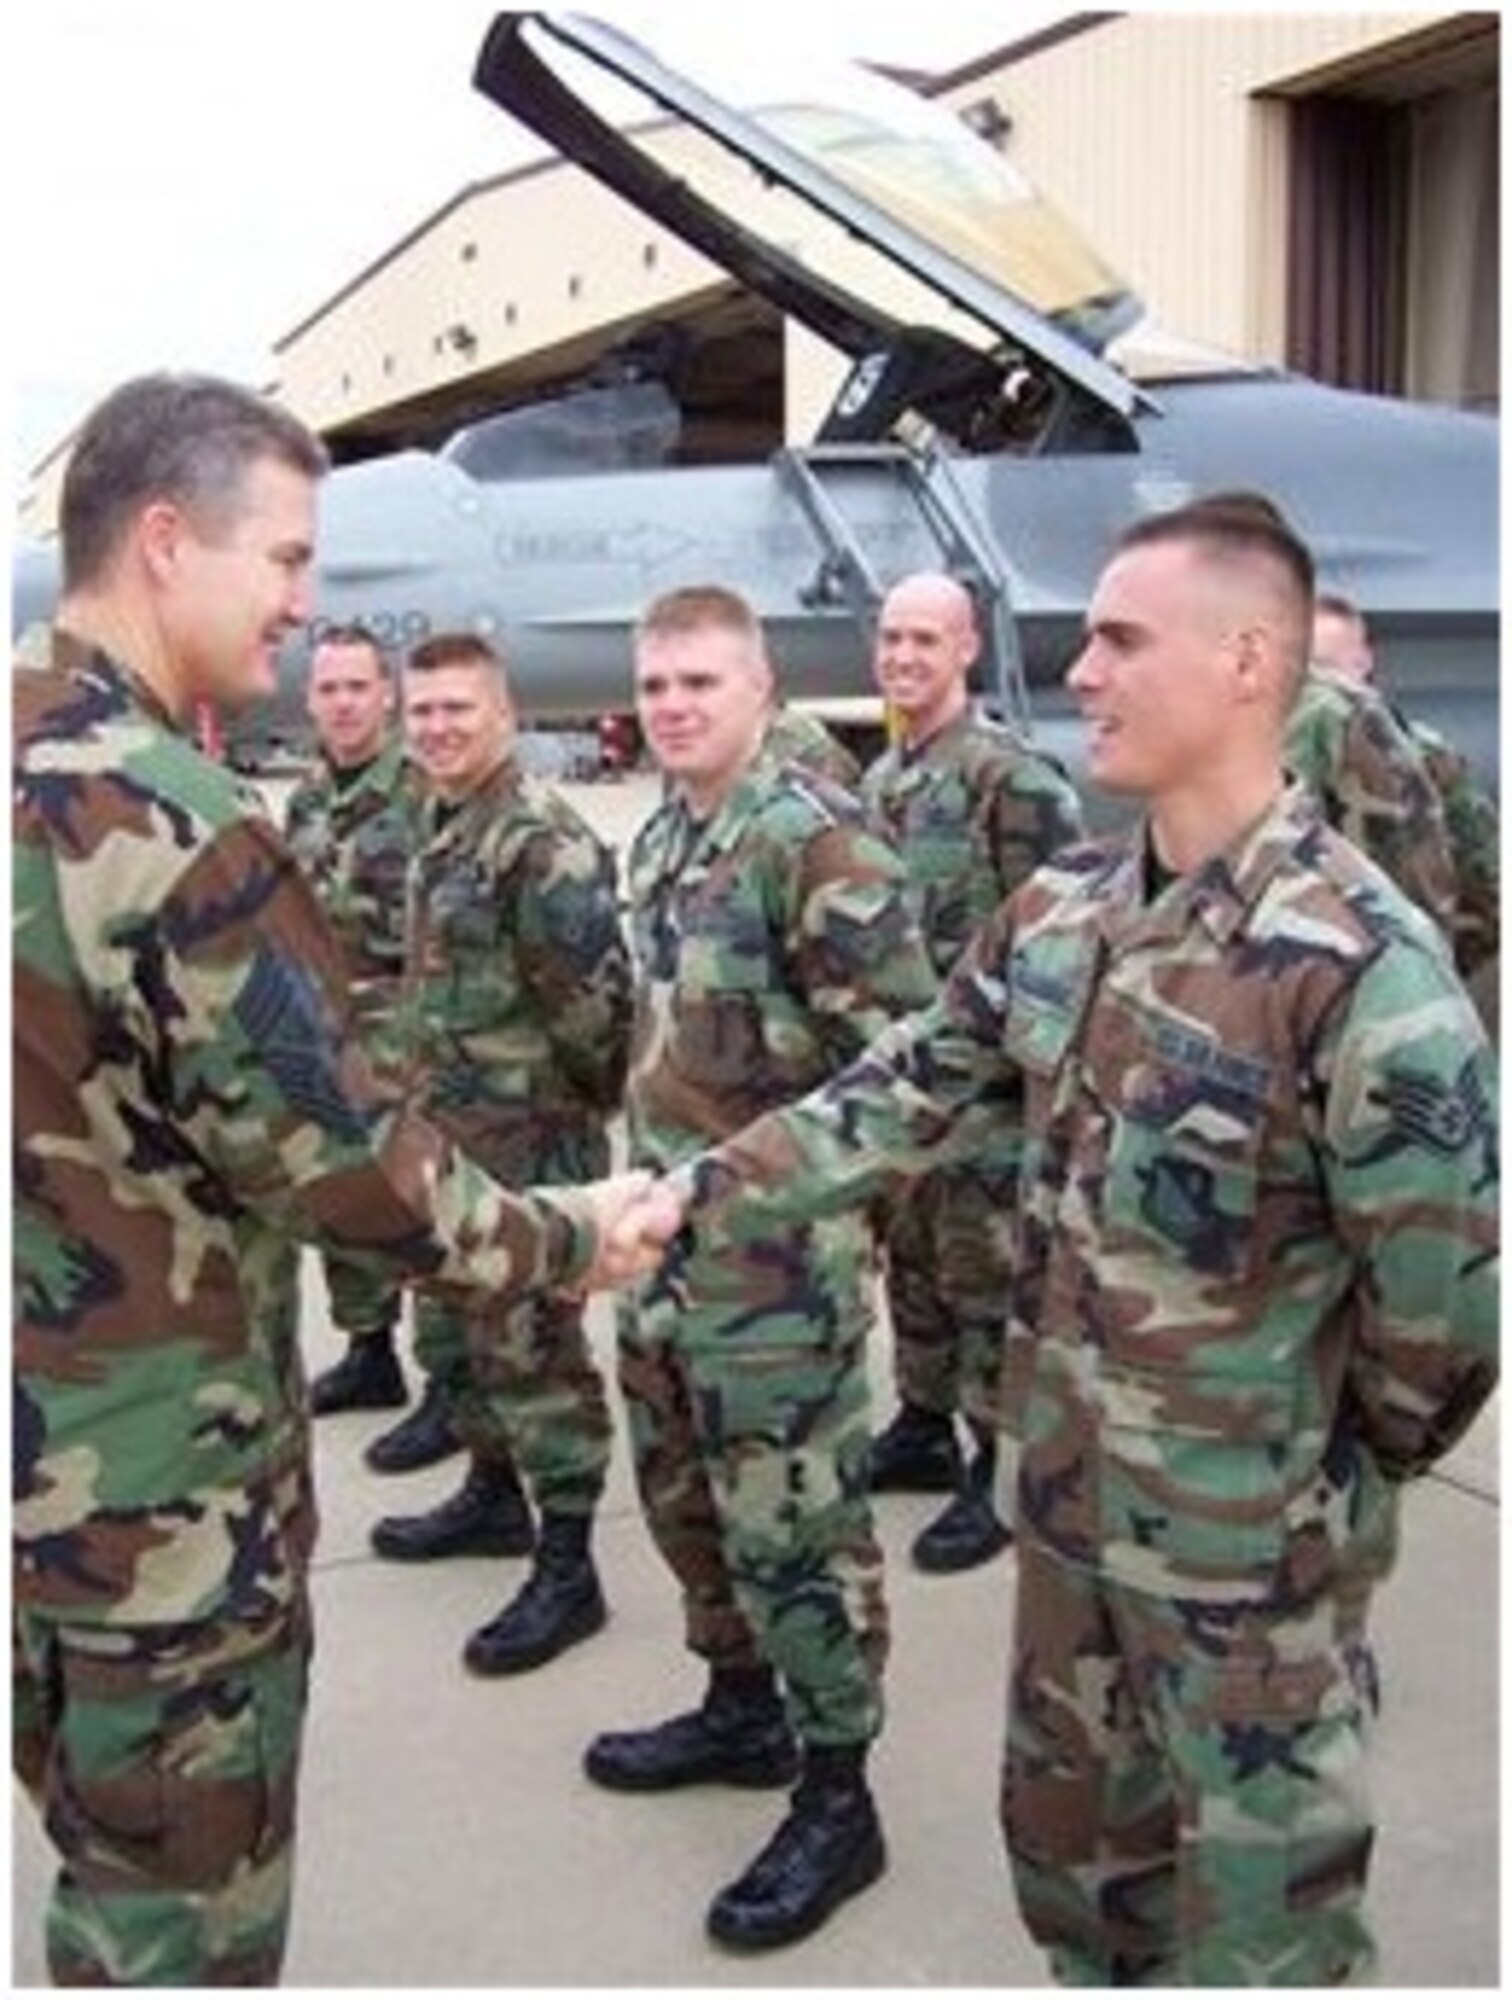 Then-Staff Sgt. Robby Gallegos (right) shakes hands with then-Chief Master Sergeant of the Air Force Gerald Murray during an official visit.  Gallegos completed his CCAF and bachelor’s degrees, and is about to finish his master’s degree while now serving as a Captain in the U.S. Air Force. (Courtesy photo)